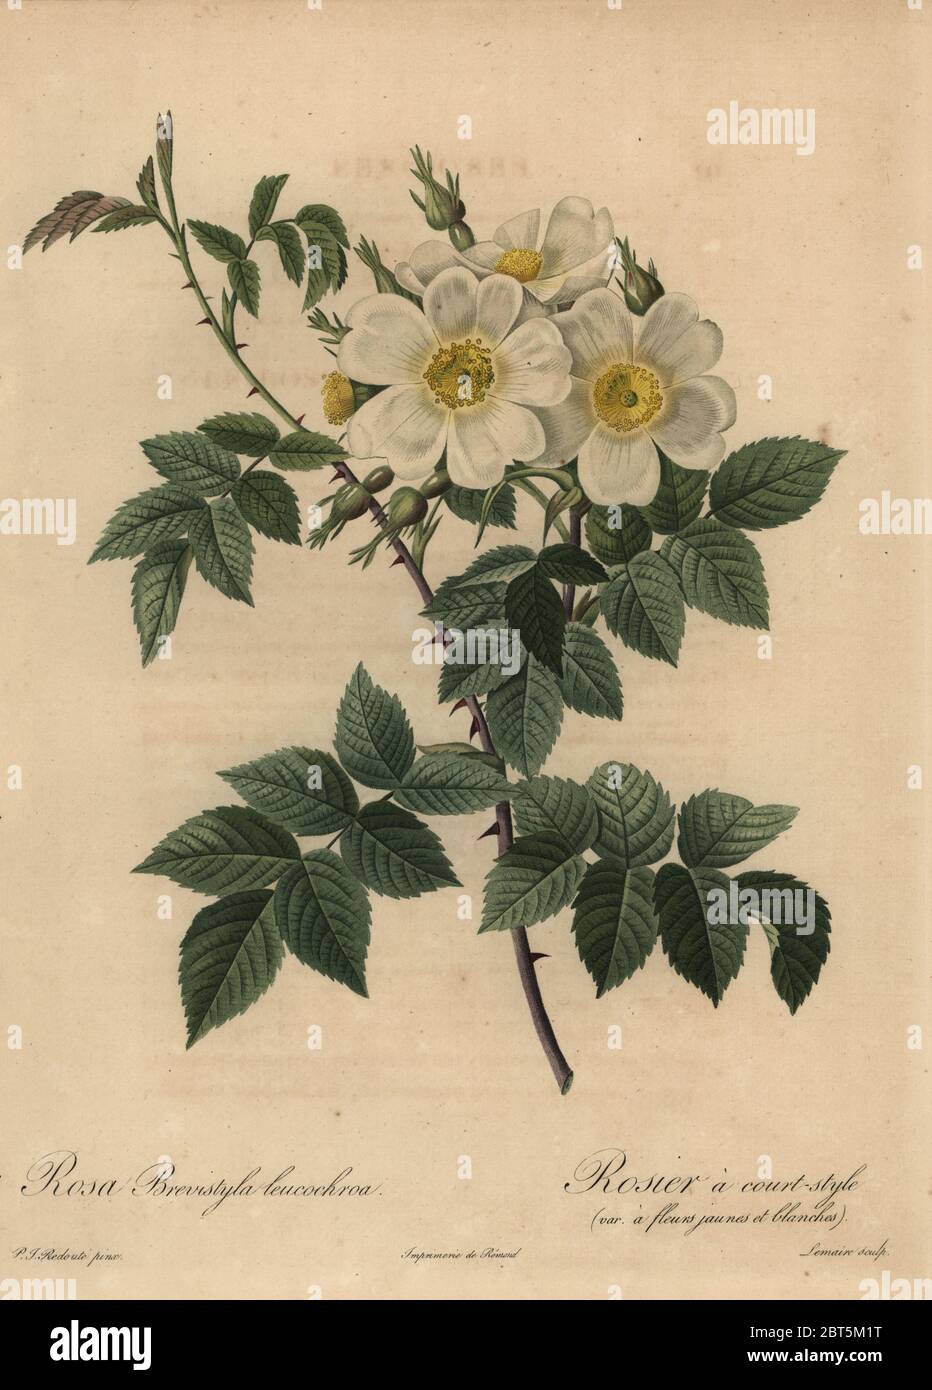 White dog rose, Rosa stylosa. Rosa brevistyla leucochroa, Rosier a court-style a fleurs jeaunes et blanches. Stipple copperplate engraving by Lemaire handcoloured a la poupee after a botanical illustration by Pierre-Joseph Redoute from the first folio edition of Les Roses, Firmin Didot, Paris, 1817. Stock Photo